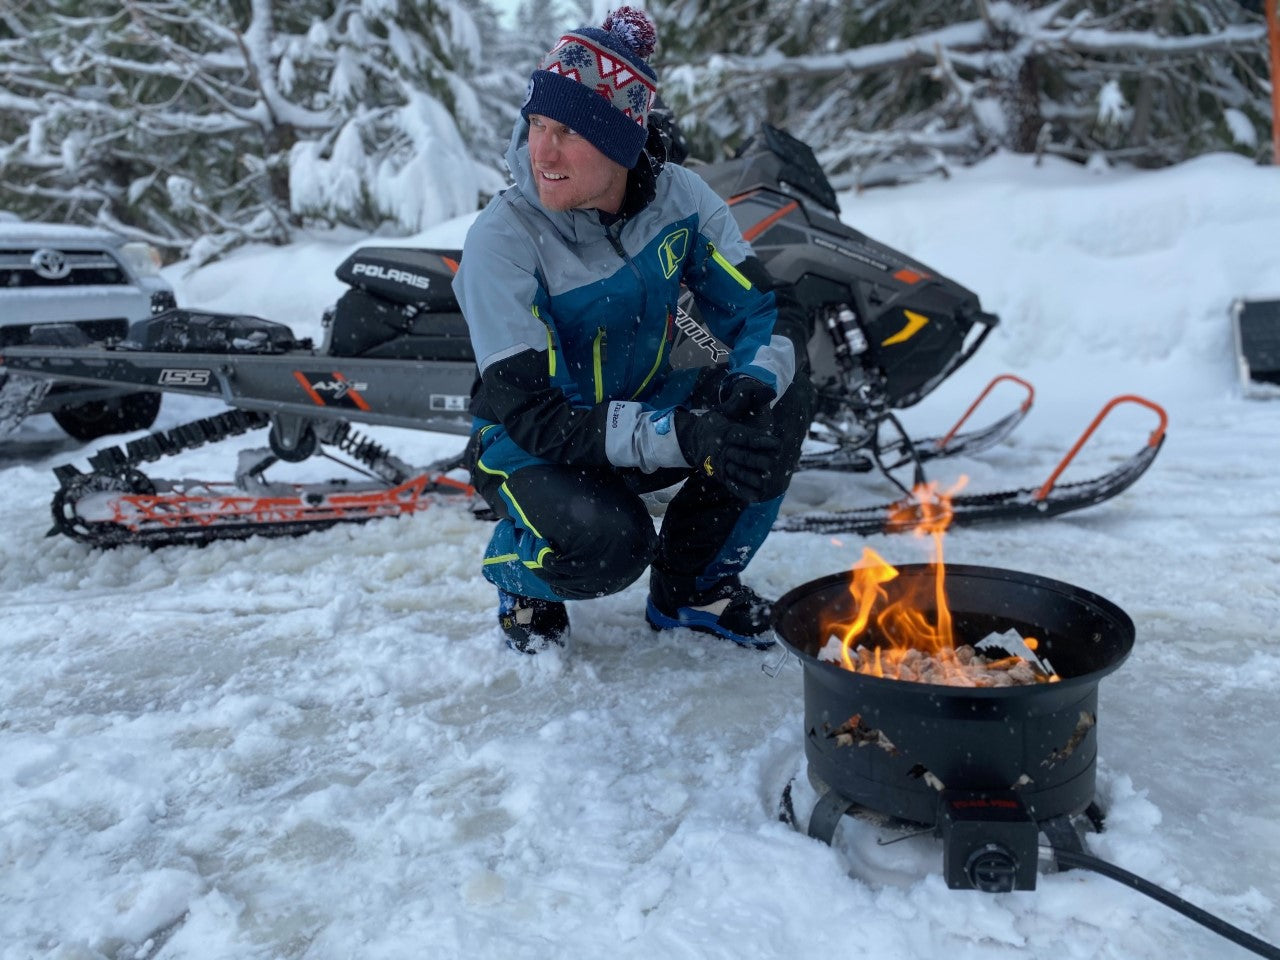 backcountry snowmobiler getting warm with portable grill and fire pit